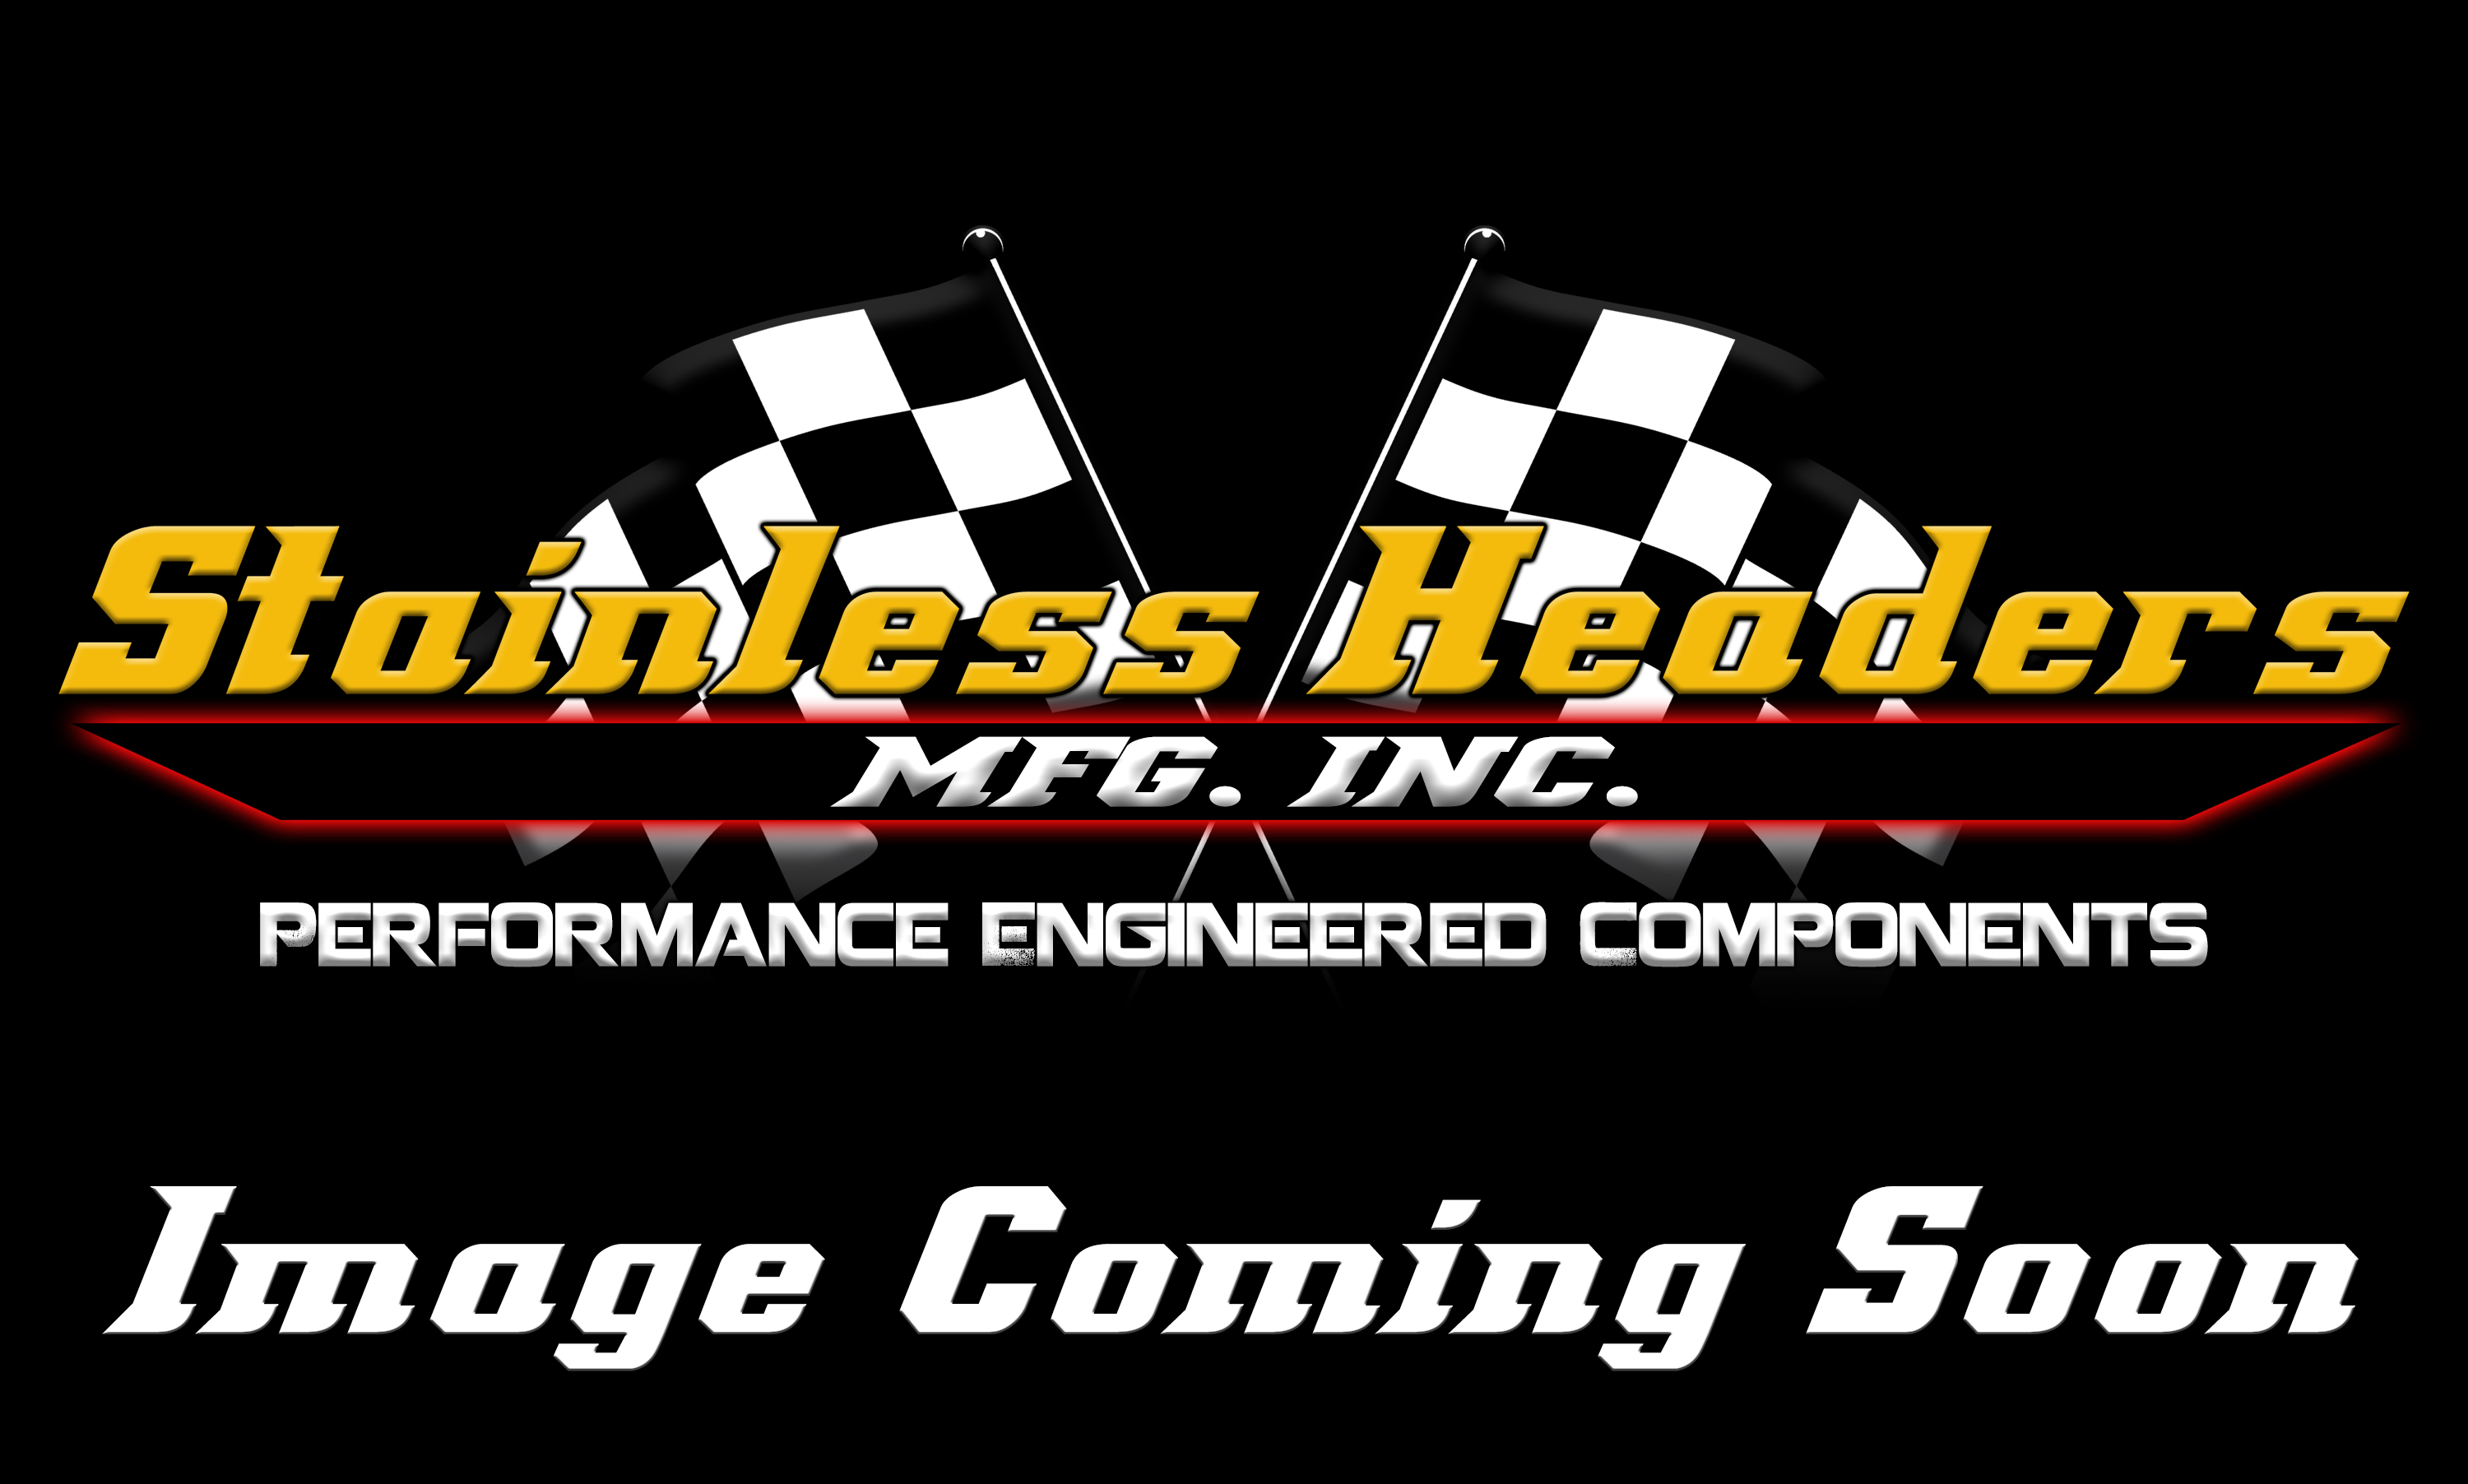 Stainless Headers - Small Block Chevy Mild Steel Header Flange to fit Reher-Morrison Head